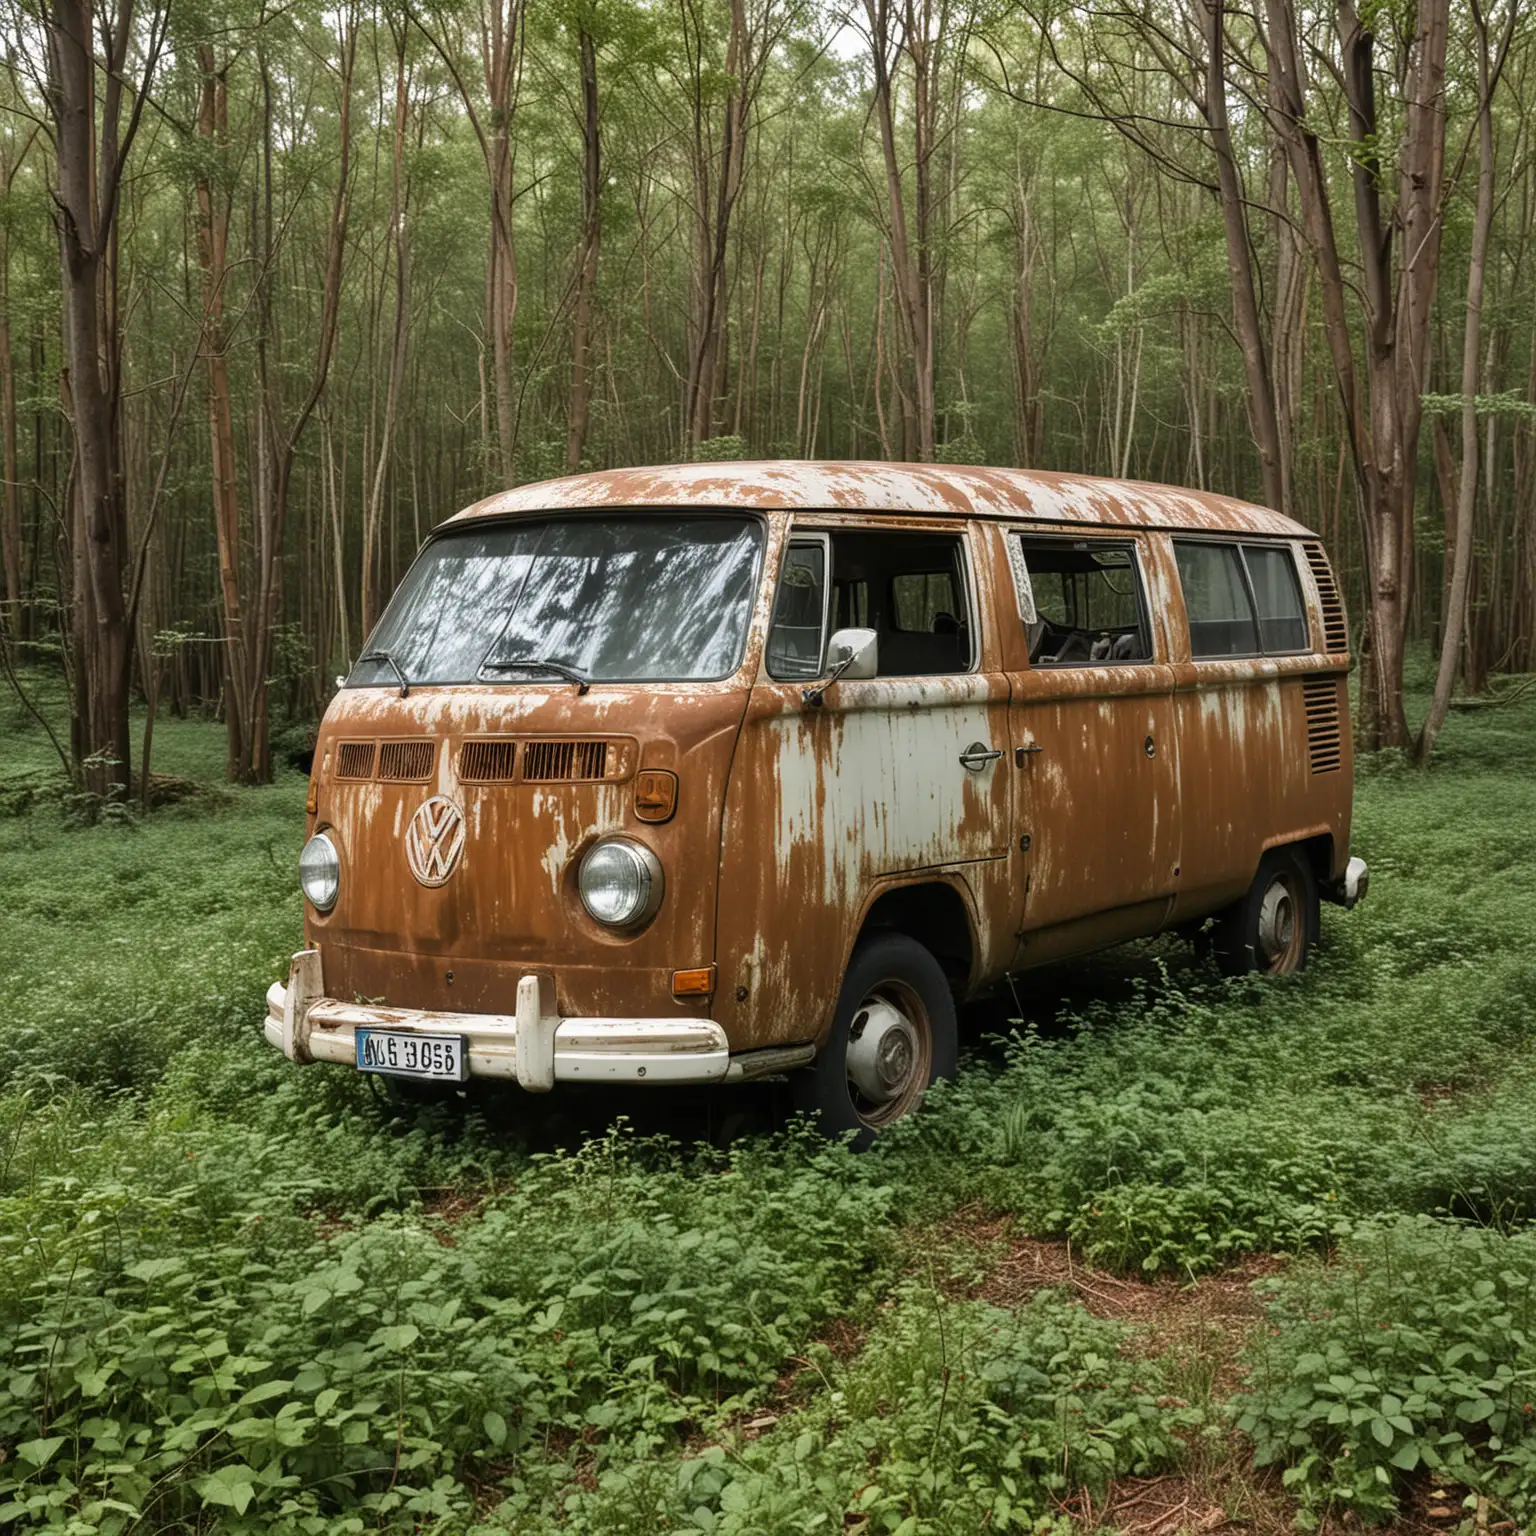 Amidst an overgrown landscape, a 1966 Volkswagen Transporter sits abandoned, its once bright paint now faded and peeling. Rust slowly consumes its metal body.